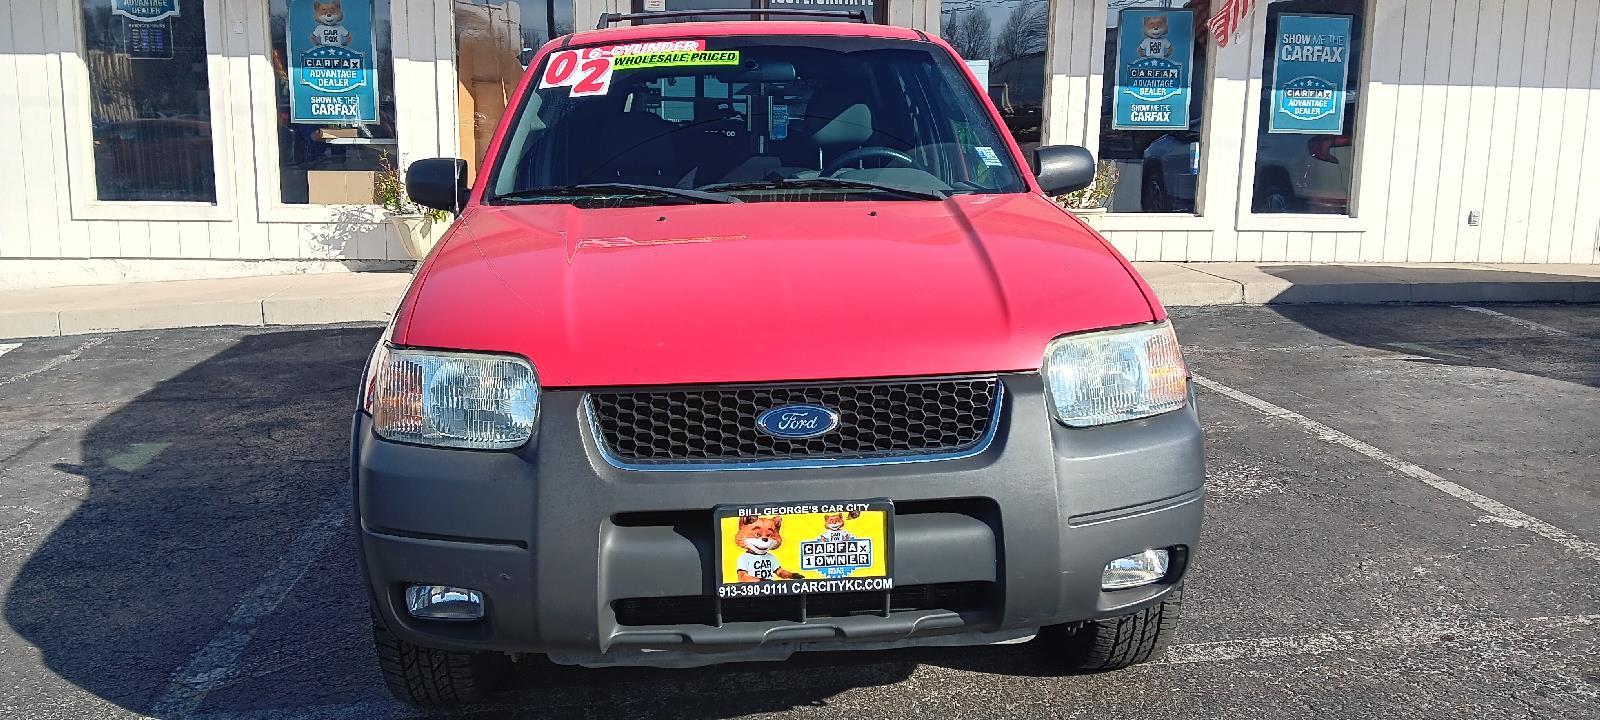 Used 2002 Ford Escape XLT Choice with VIN 1FMYU03102KE00042 for sale in Kansas City